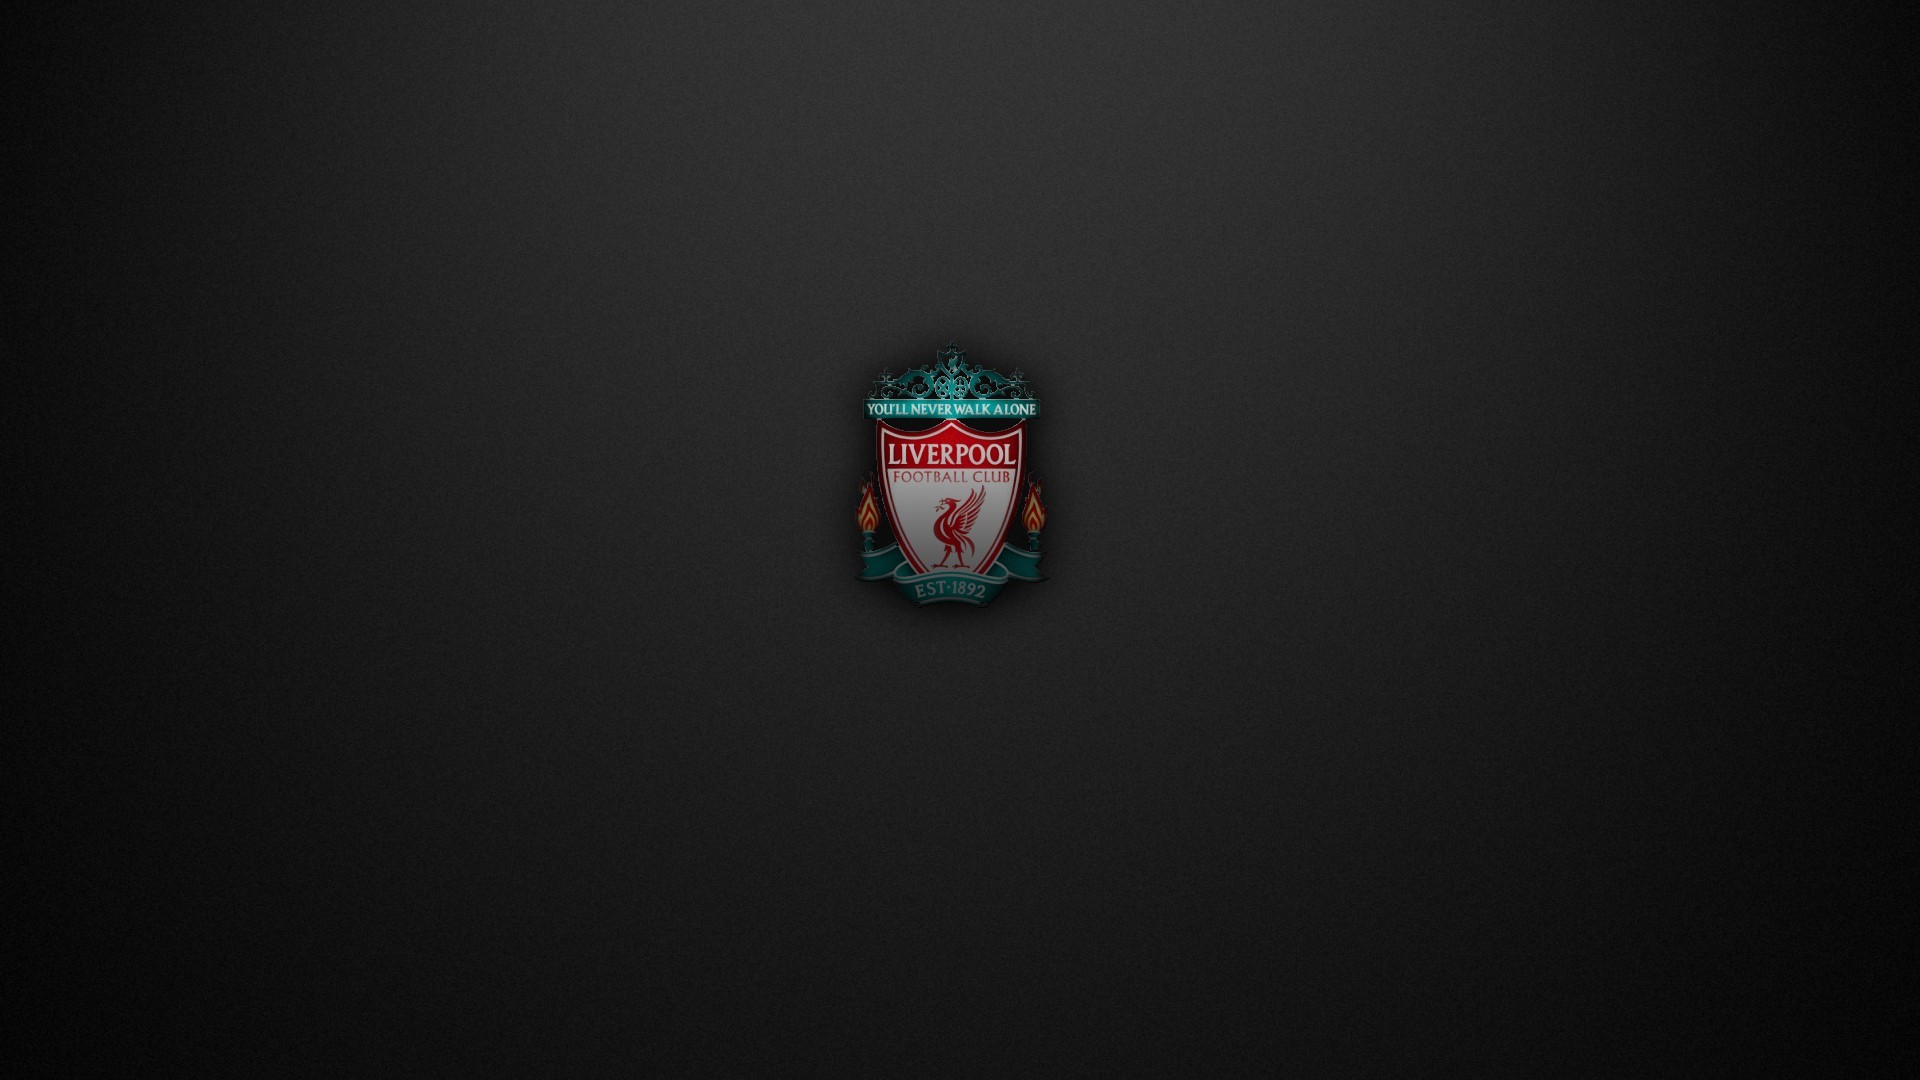 Liverpool fc wallpapers hd desktop and mobile backgrounds